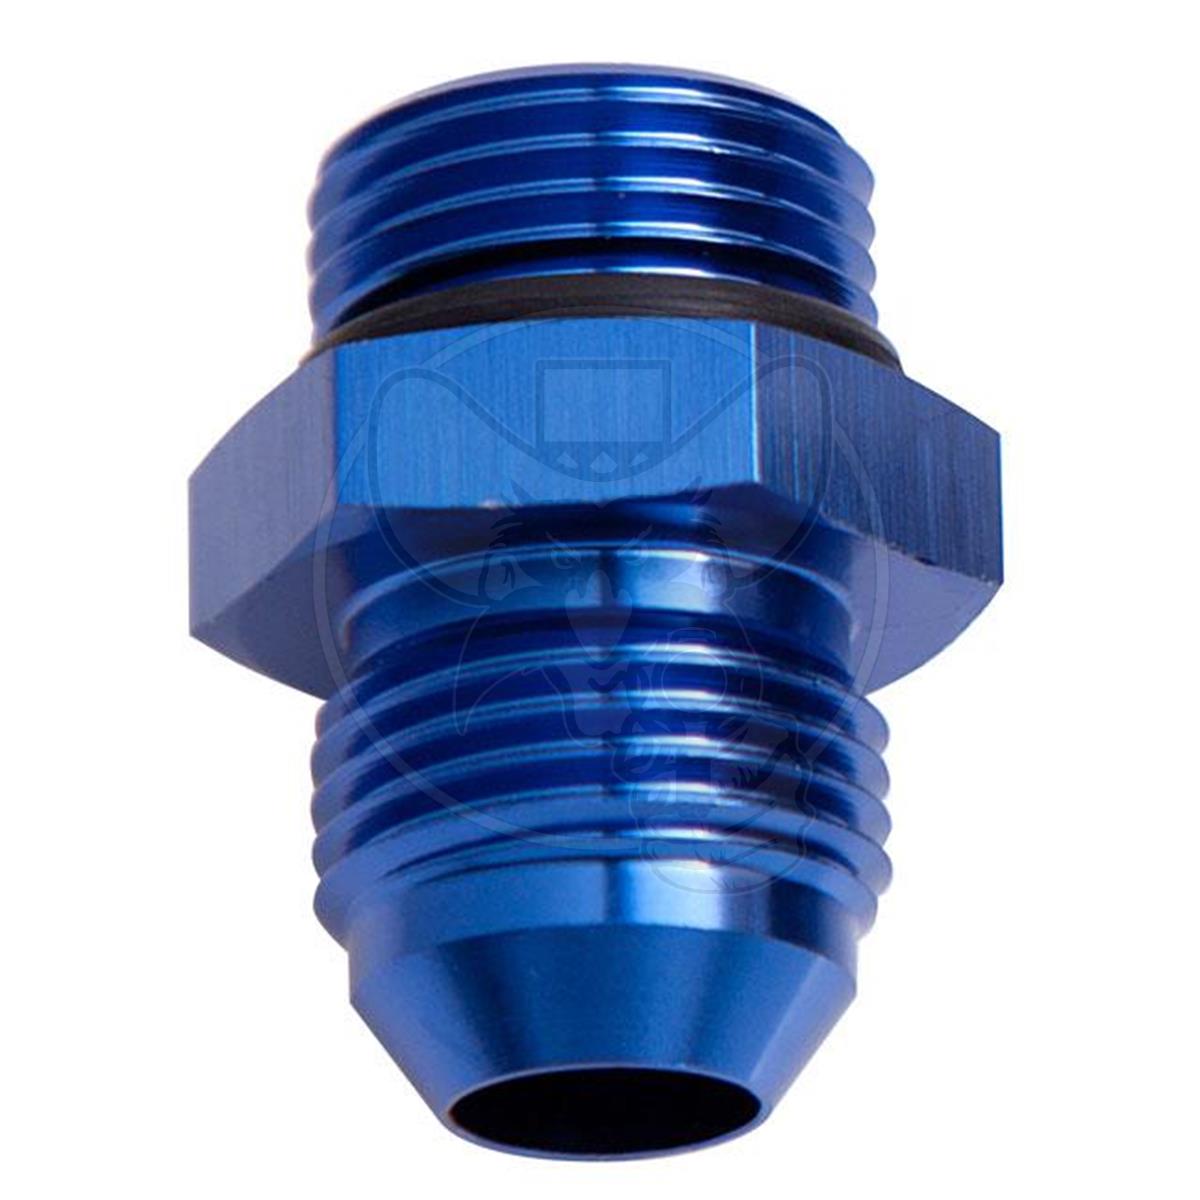 Aeroflow -10 ORB to -10AN Straight Male Flare Adapter - Blue